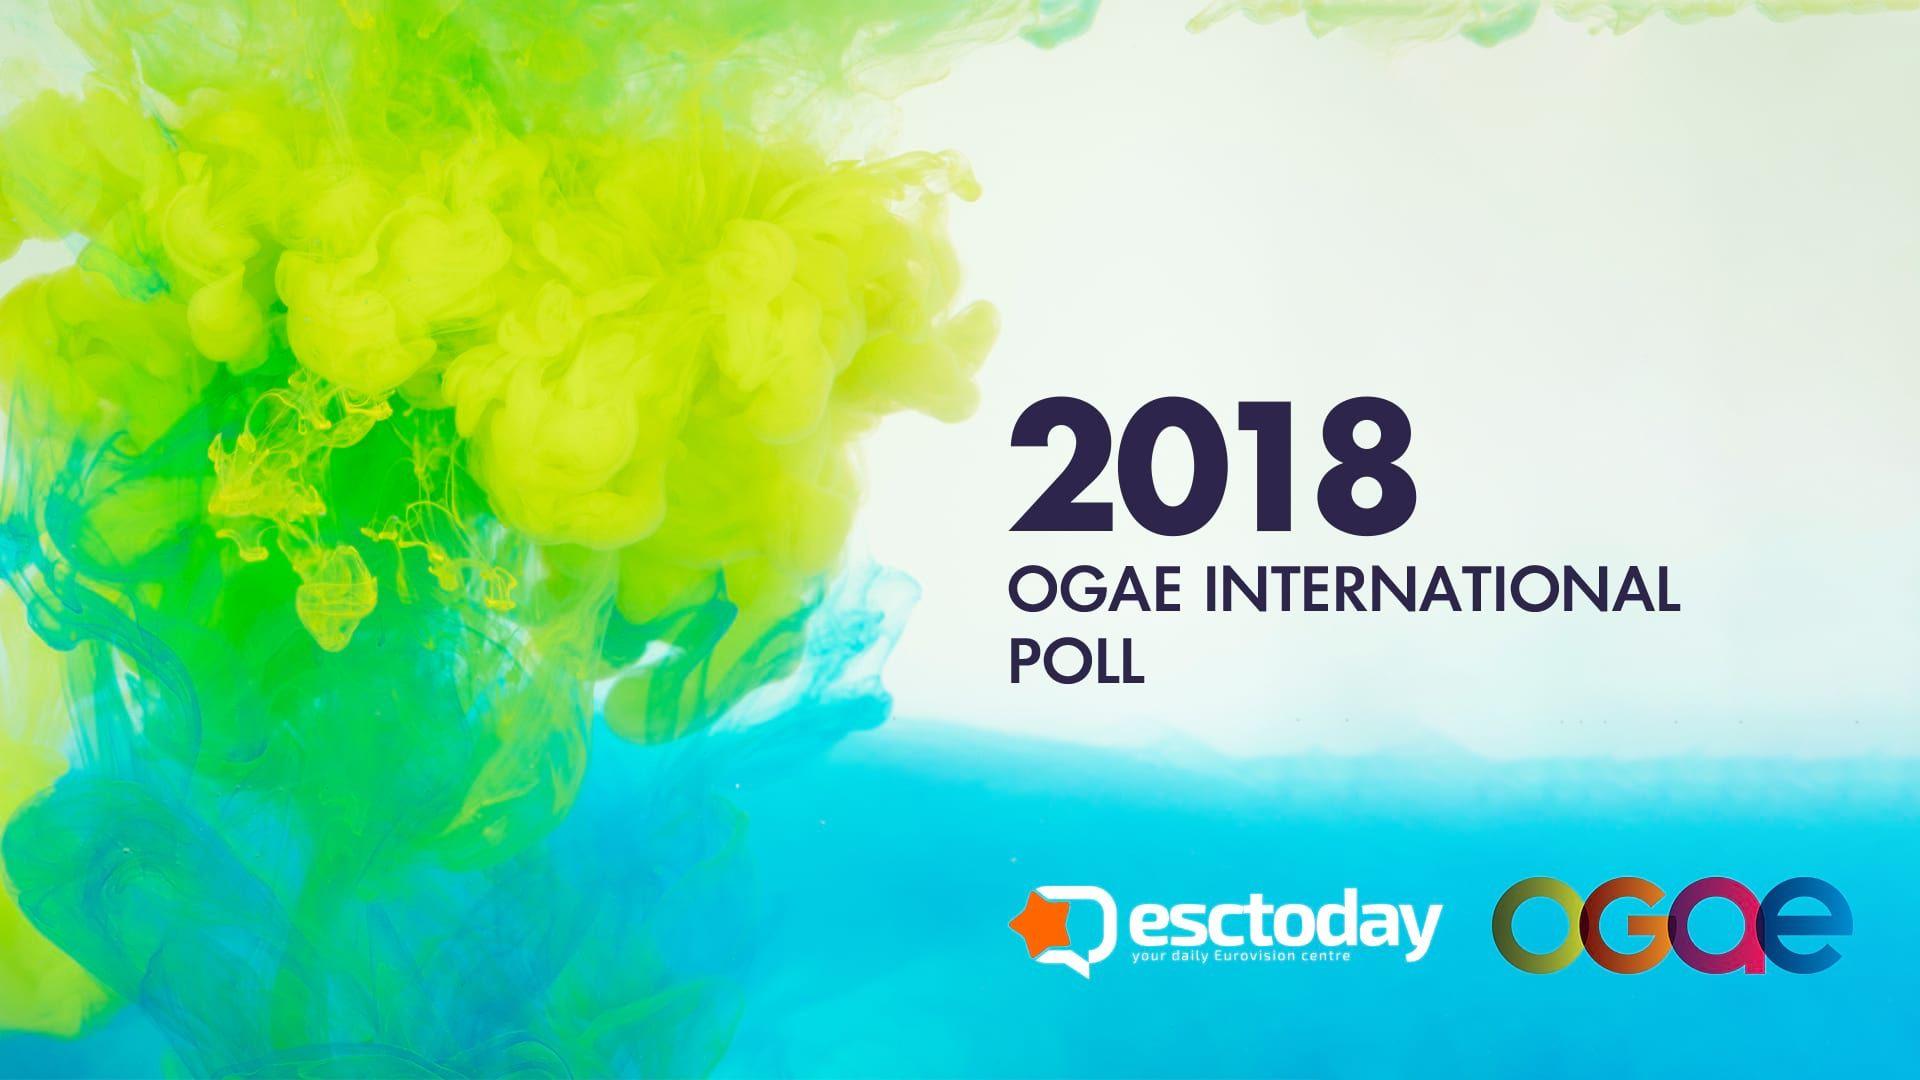 Eurovision OGAE Poll 2018: The results from Luxembourg are